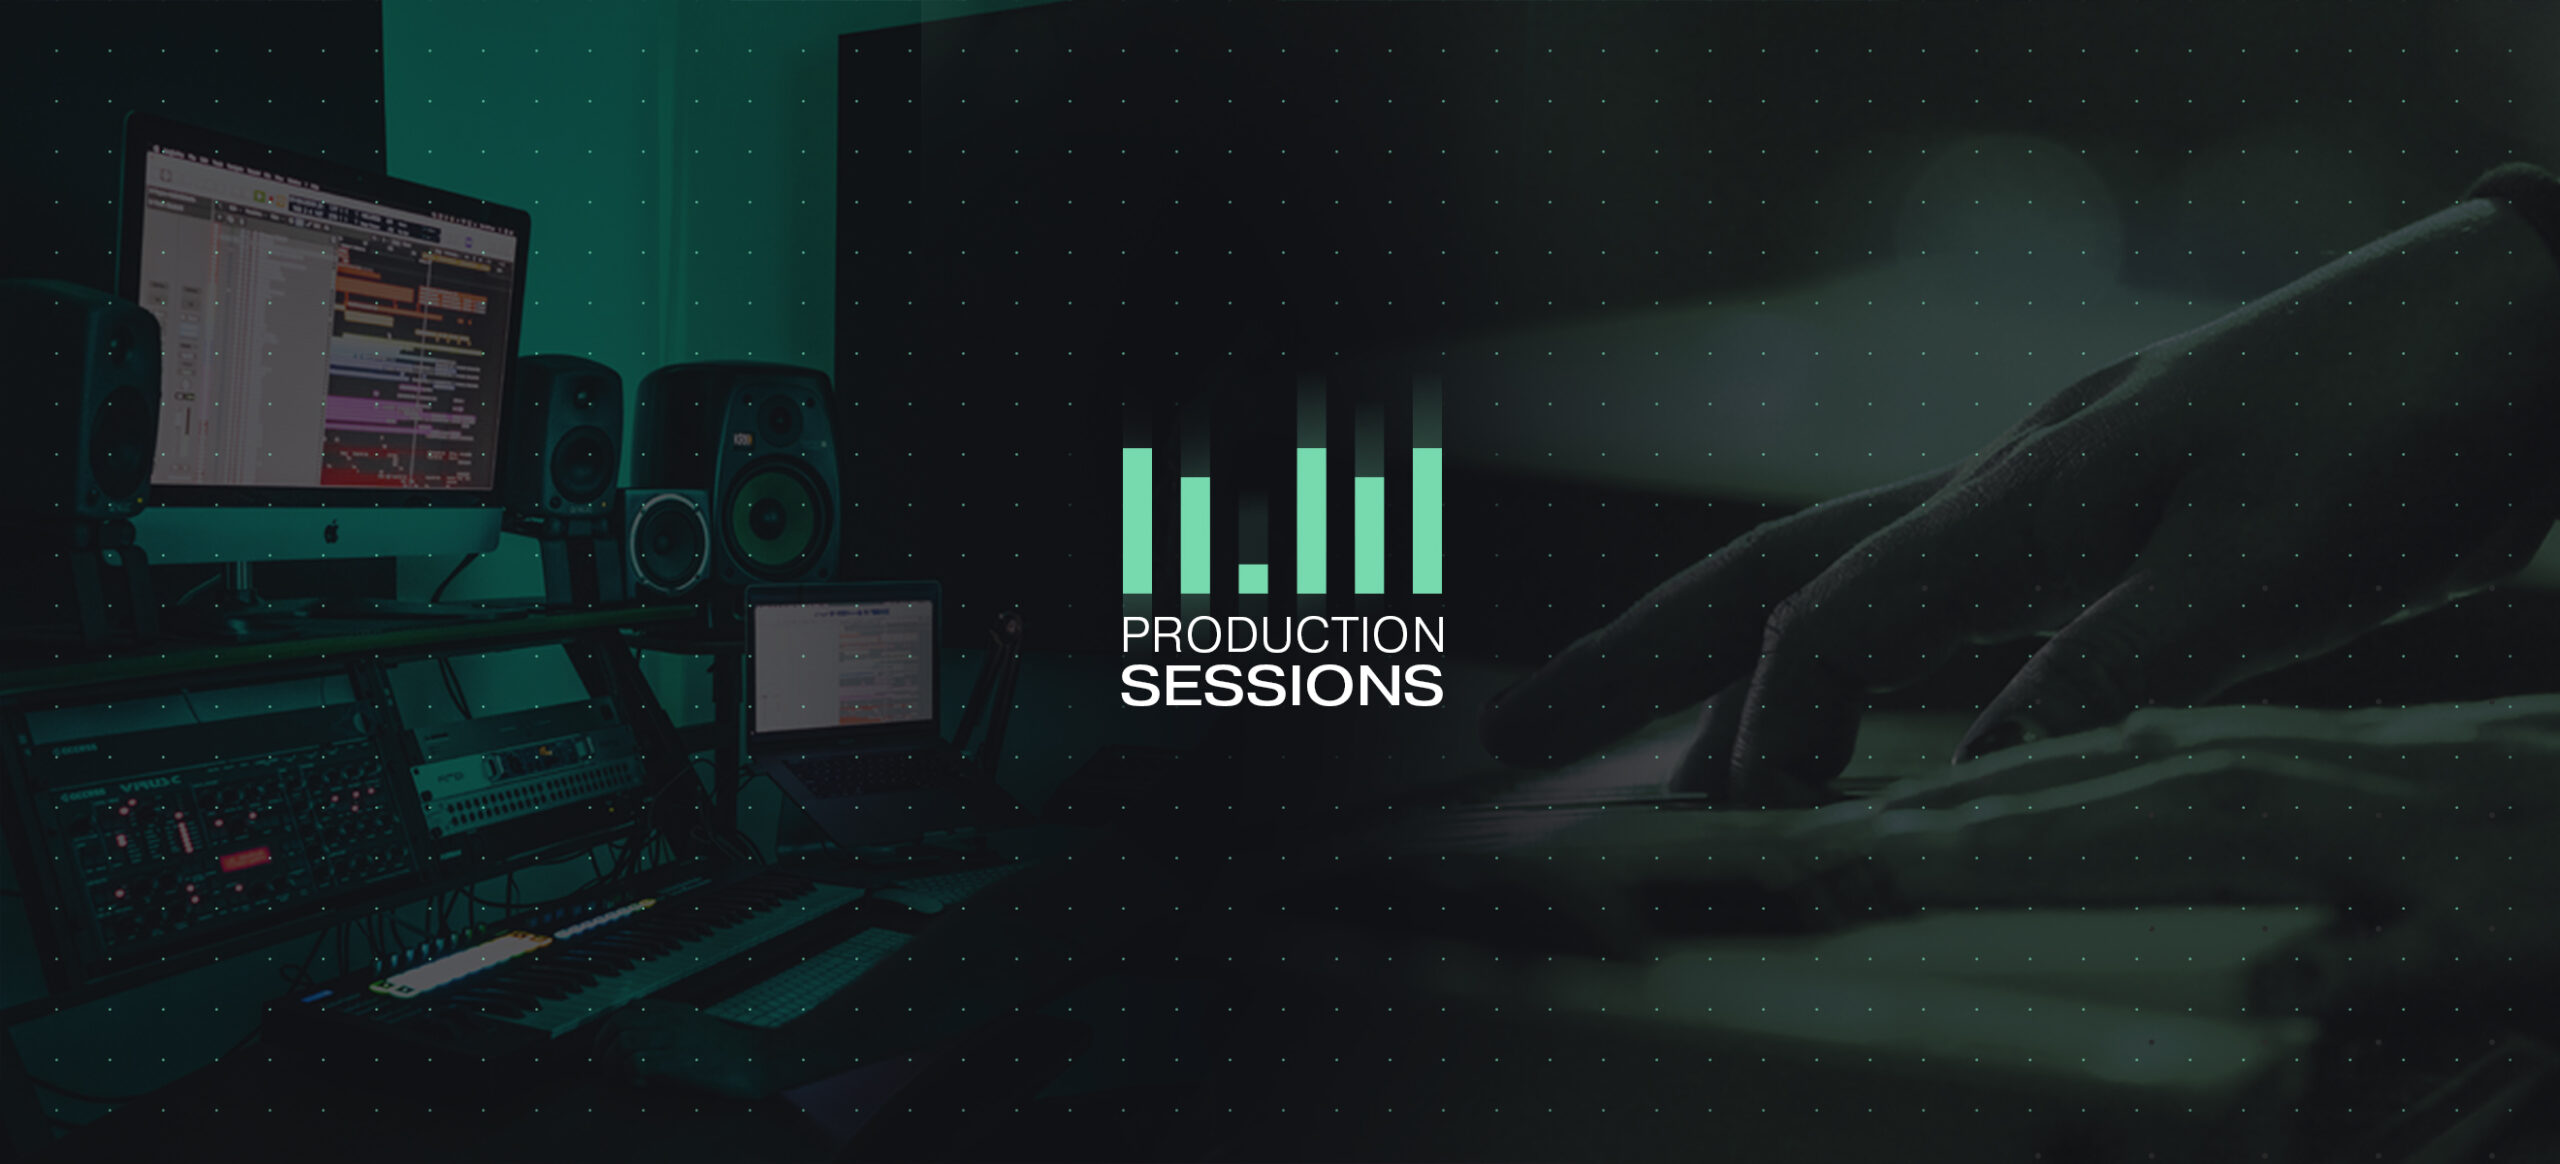 future-engineers-production-sessions-studio-banner-02